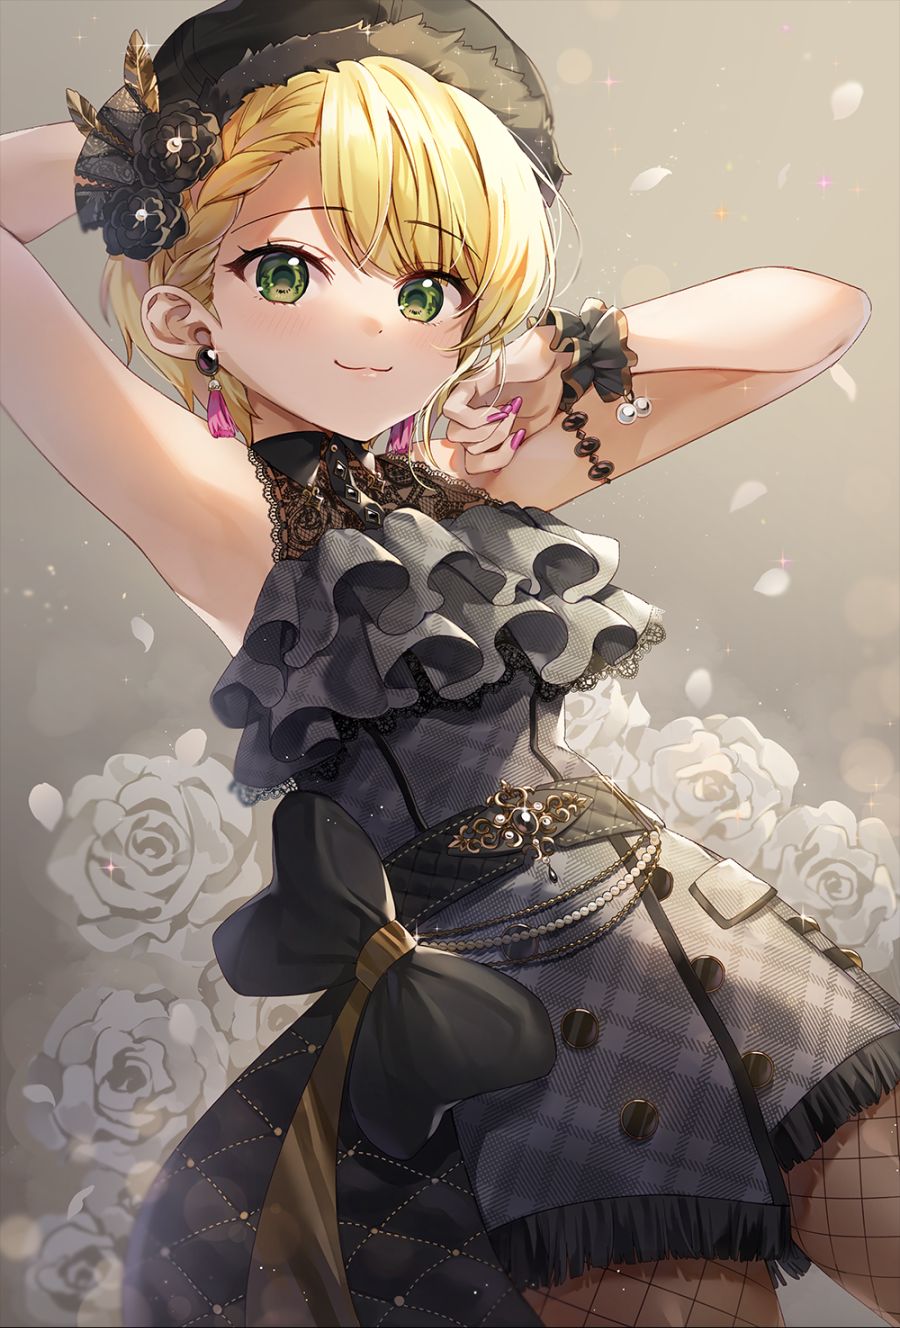 __miyamoto_frederica_idolmaster_and_1_more_drawn_by_chyoling__8b4d50343c6638e3fa4157233876a999.png